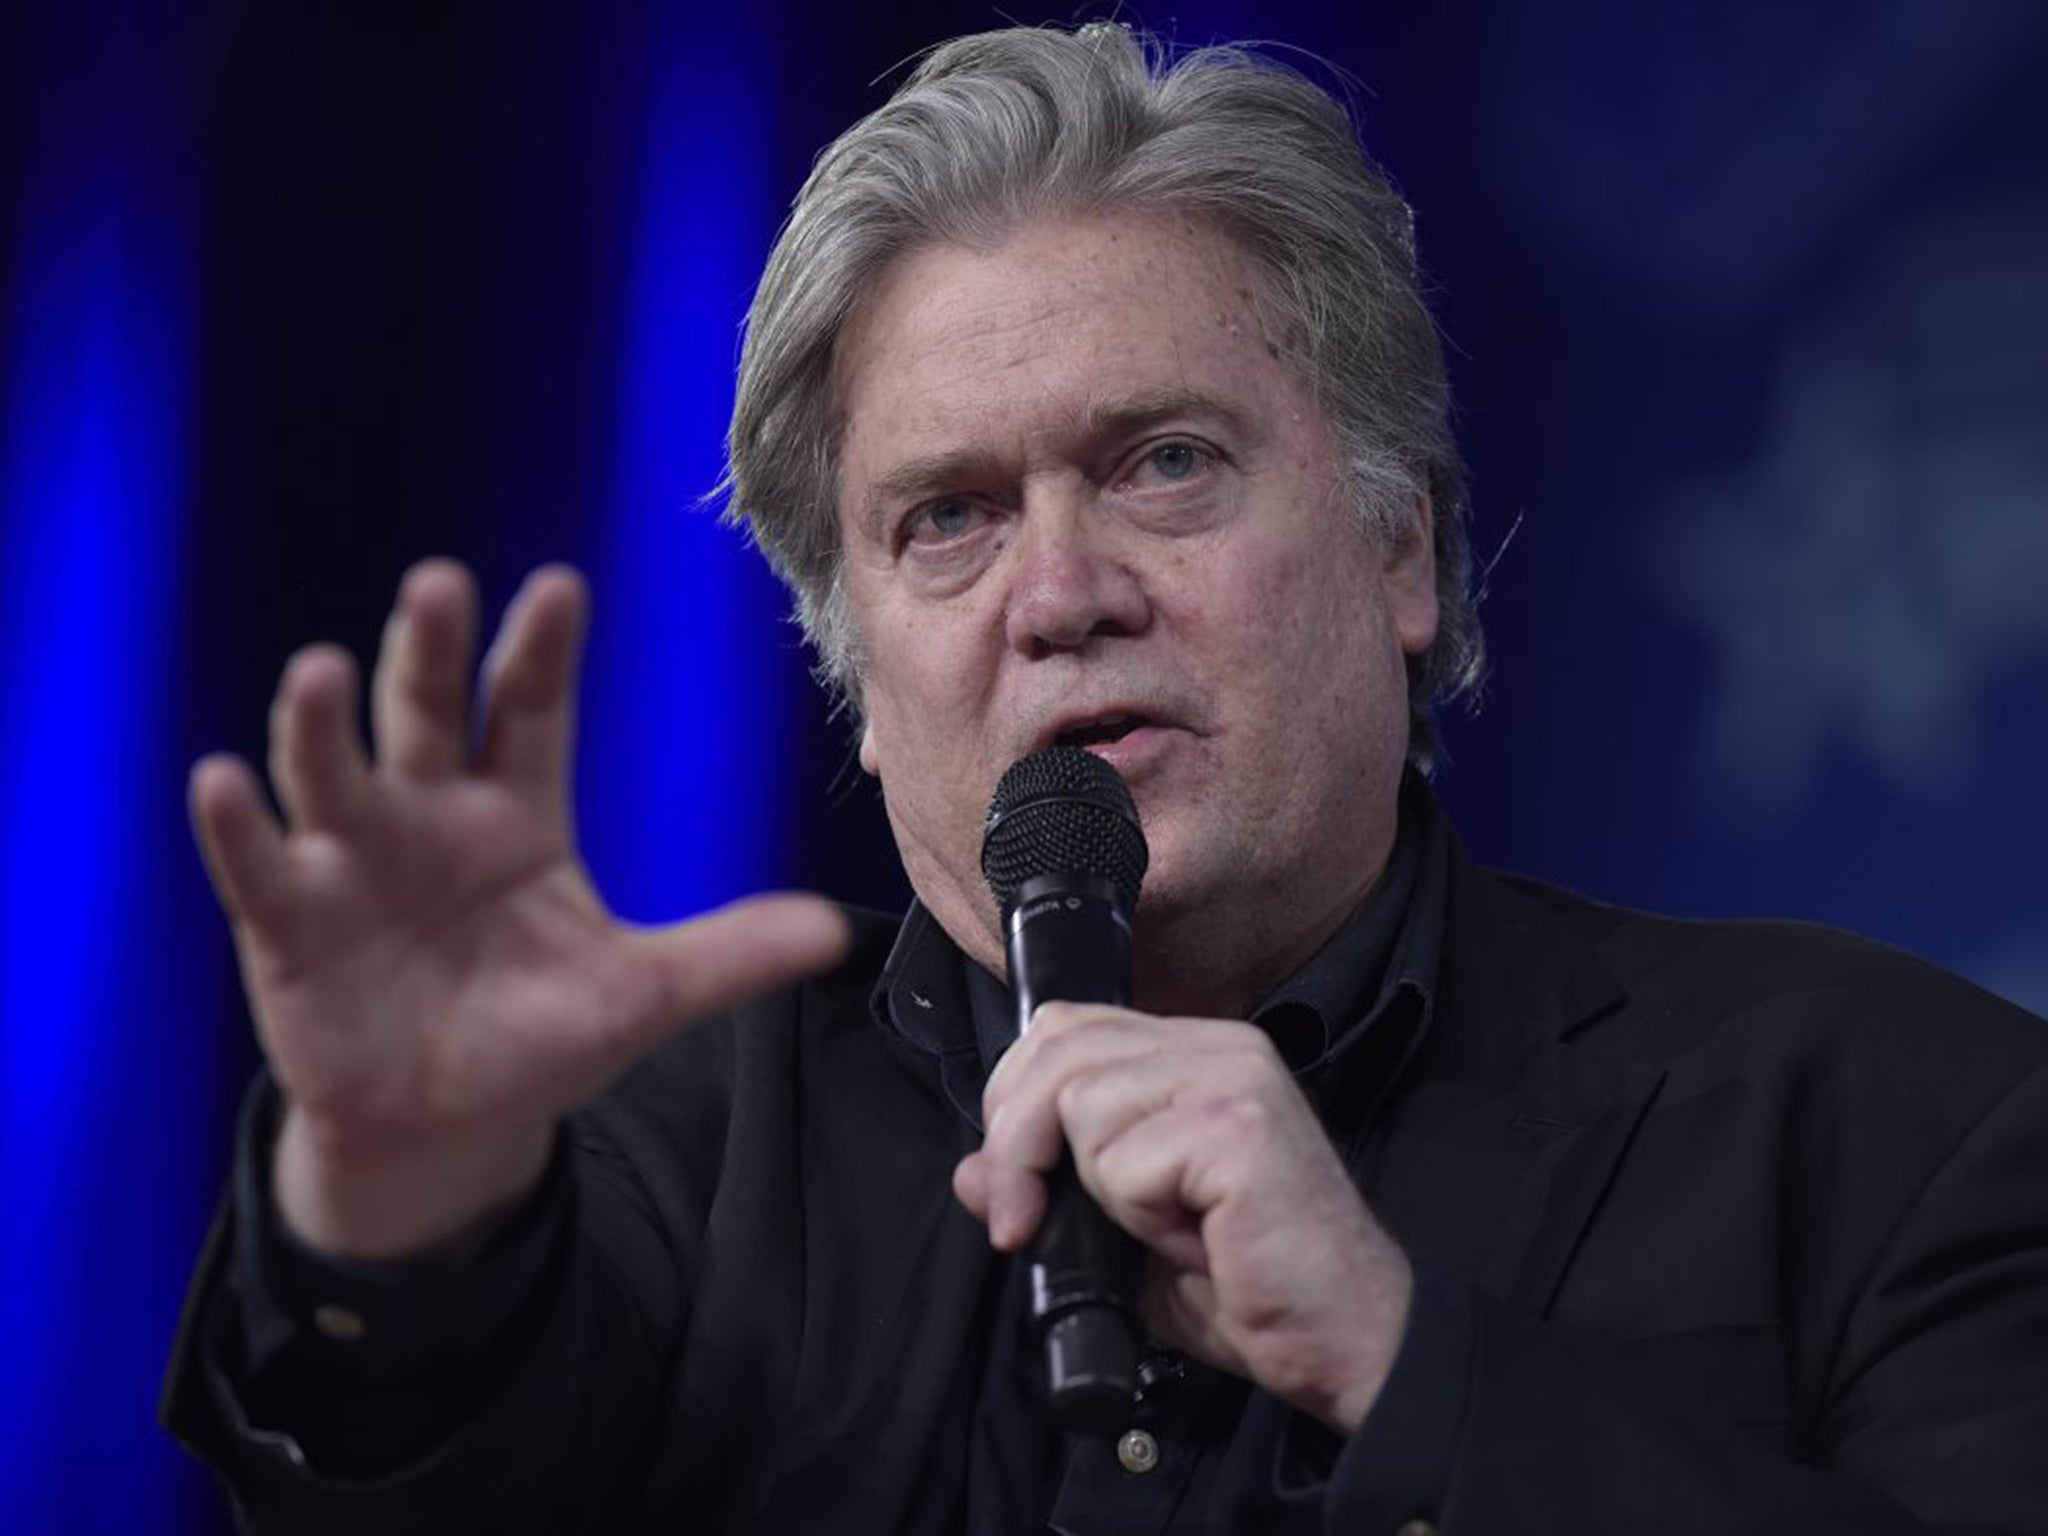 Trump’s speech was campaign boiler-plate – Bannon, though, fed the conference real red meat